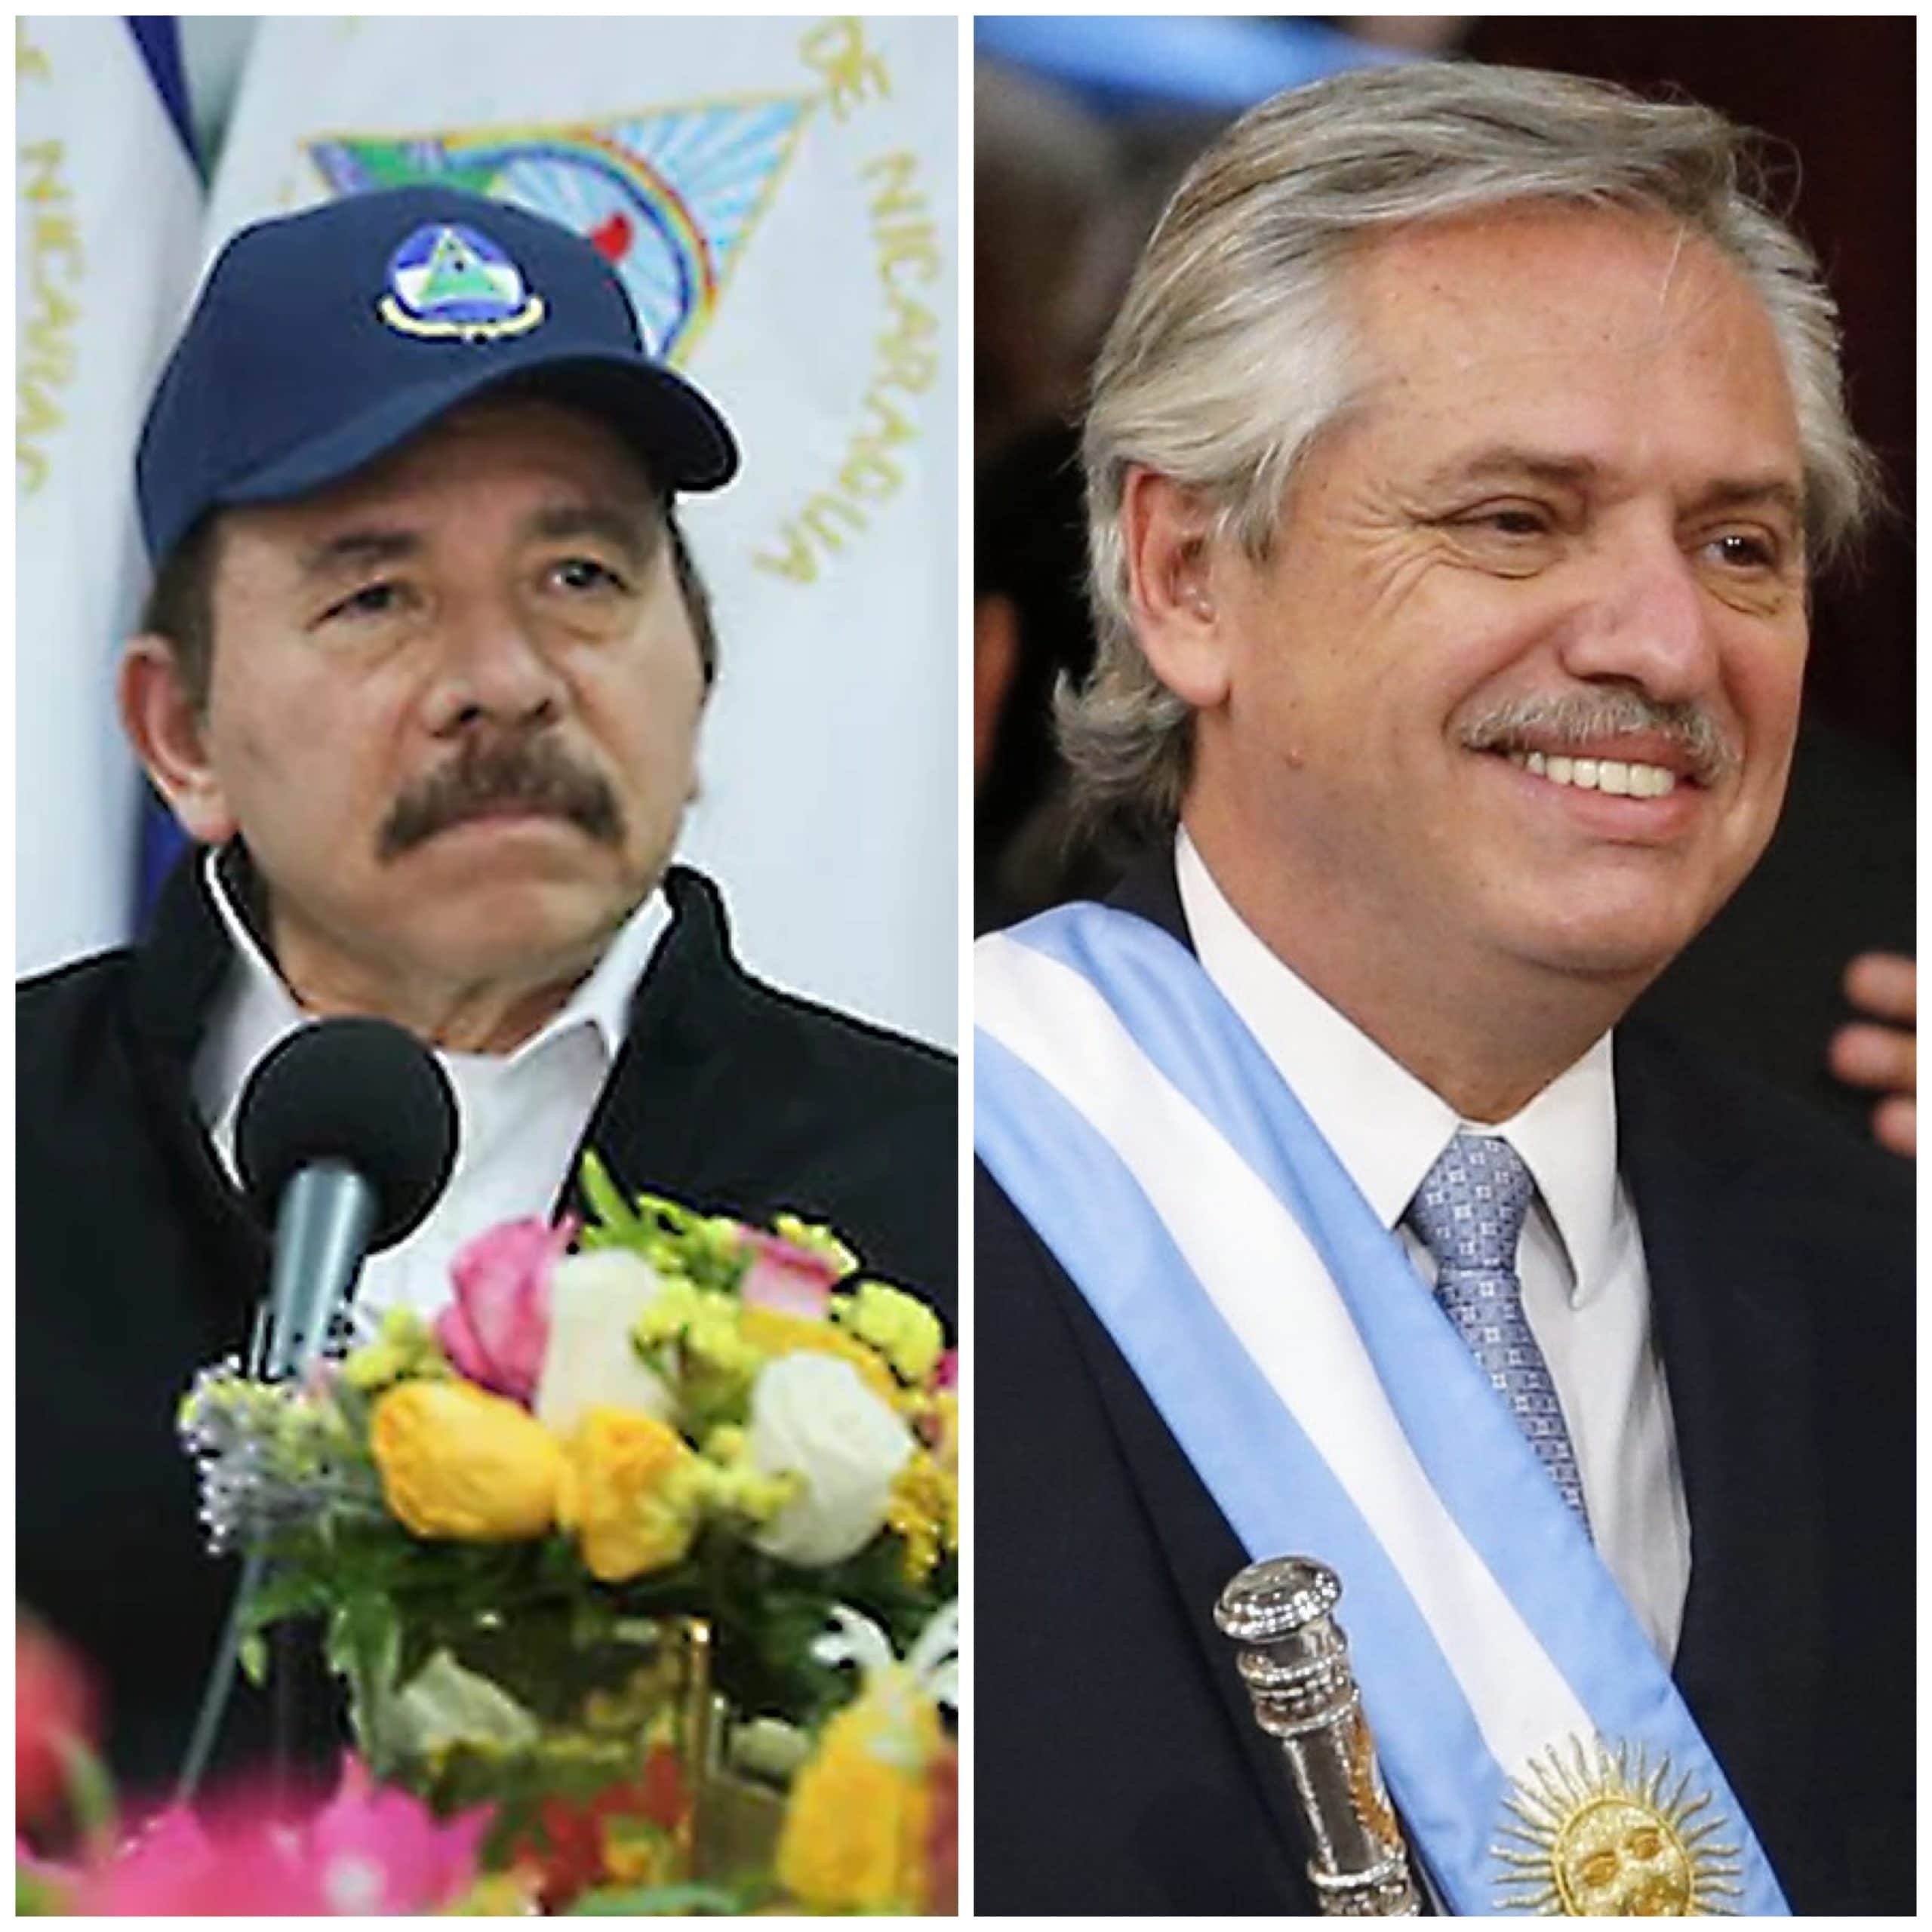 Argentina will not send a delegation to the inauguration of Ortega and Murillo